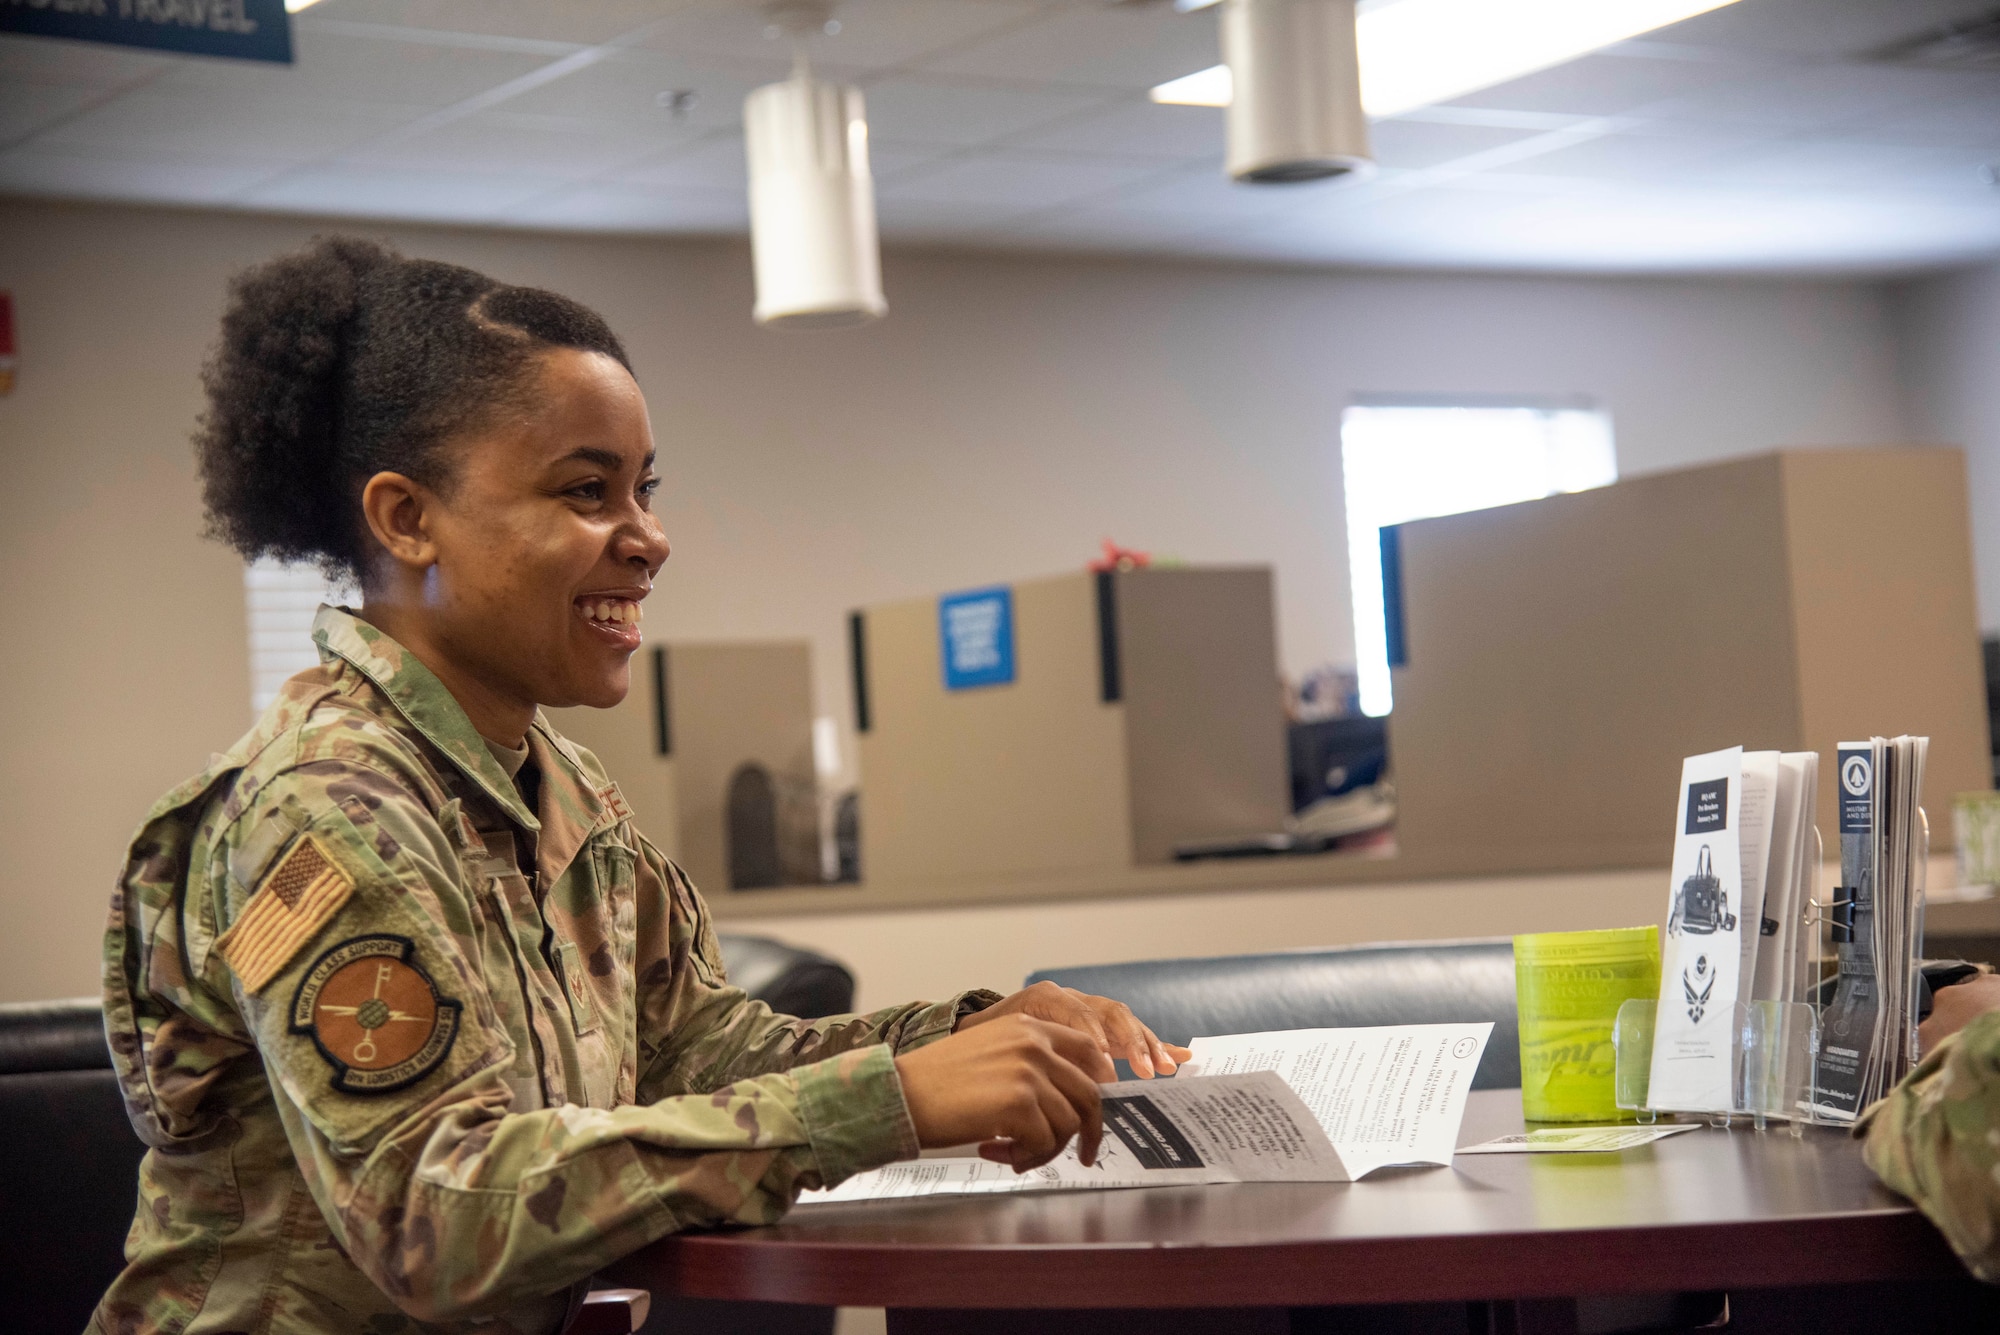 U.S. Air Force Senior Airman Quamashae Riggins, 6th Logistics Readiness Squadron (LRS) Cargo Movement Specialist, briefs an Airman on the 6th LRS Travel Management Office’s personal property processes at MacDill Air Force Base, Florida, May 26, 2021. Any military member who is retiring, separating or changing duty stations will work with TMO, specifically personal property and passenger travel, to get their personal belongings shipped to their next home.